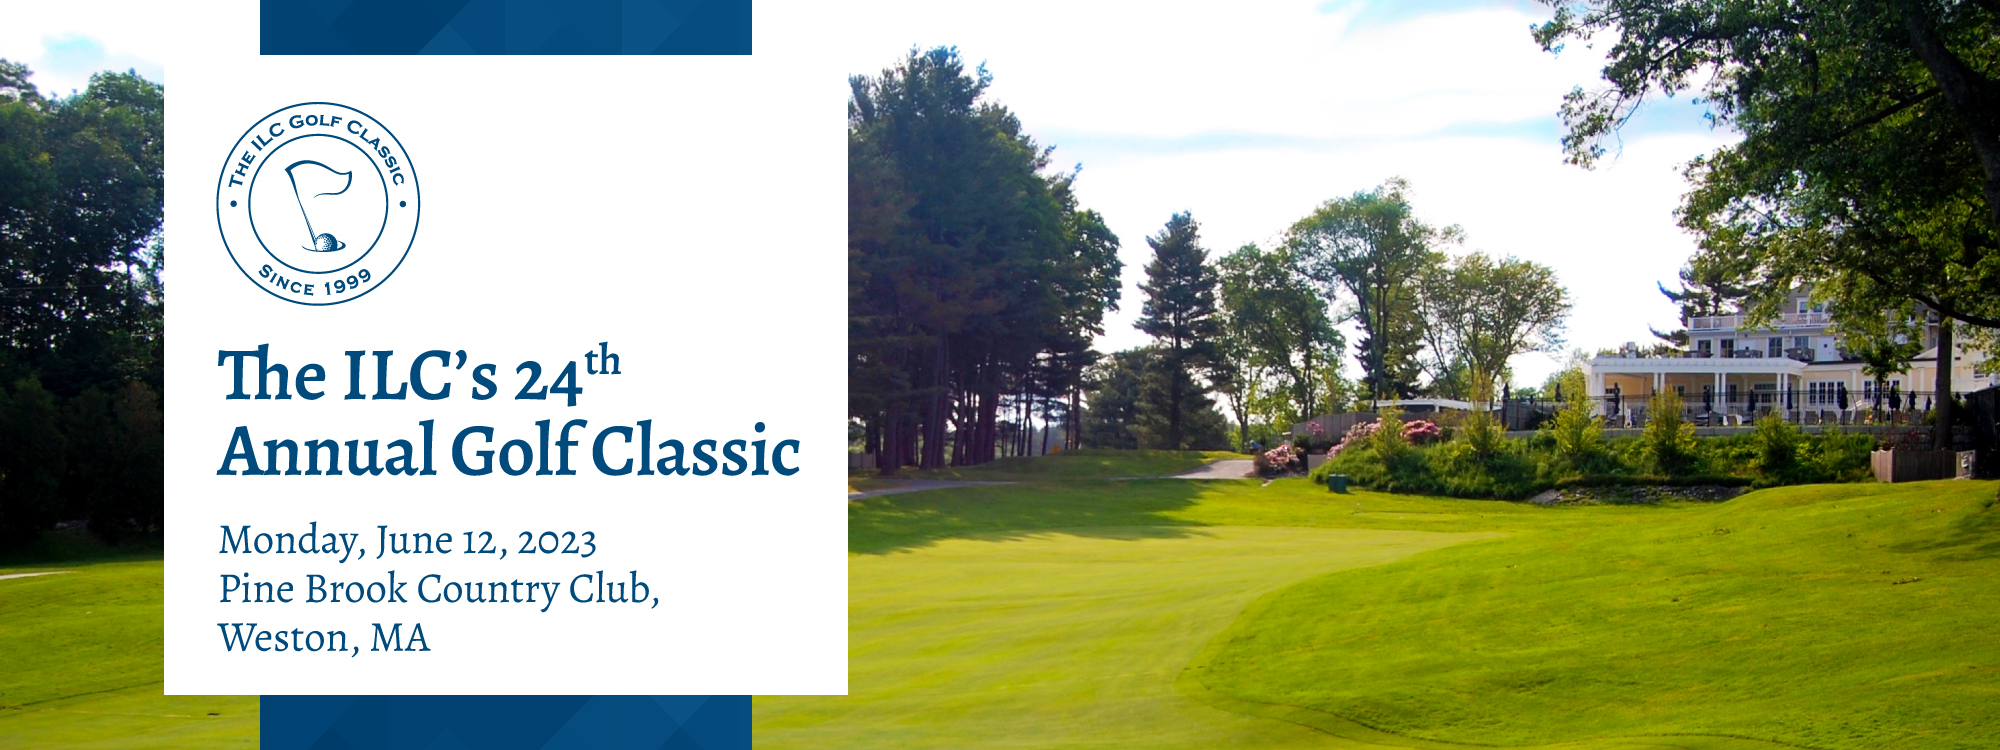 The ILC's 24th Annual Golf Classic, Monday June 12, 2023, Pine Brook Country Club, Weston, MA